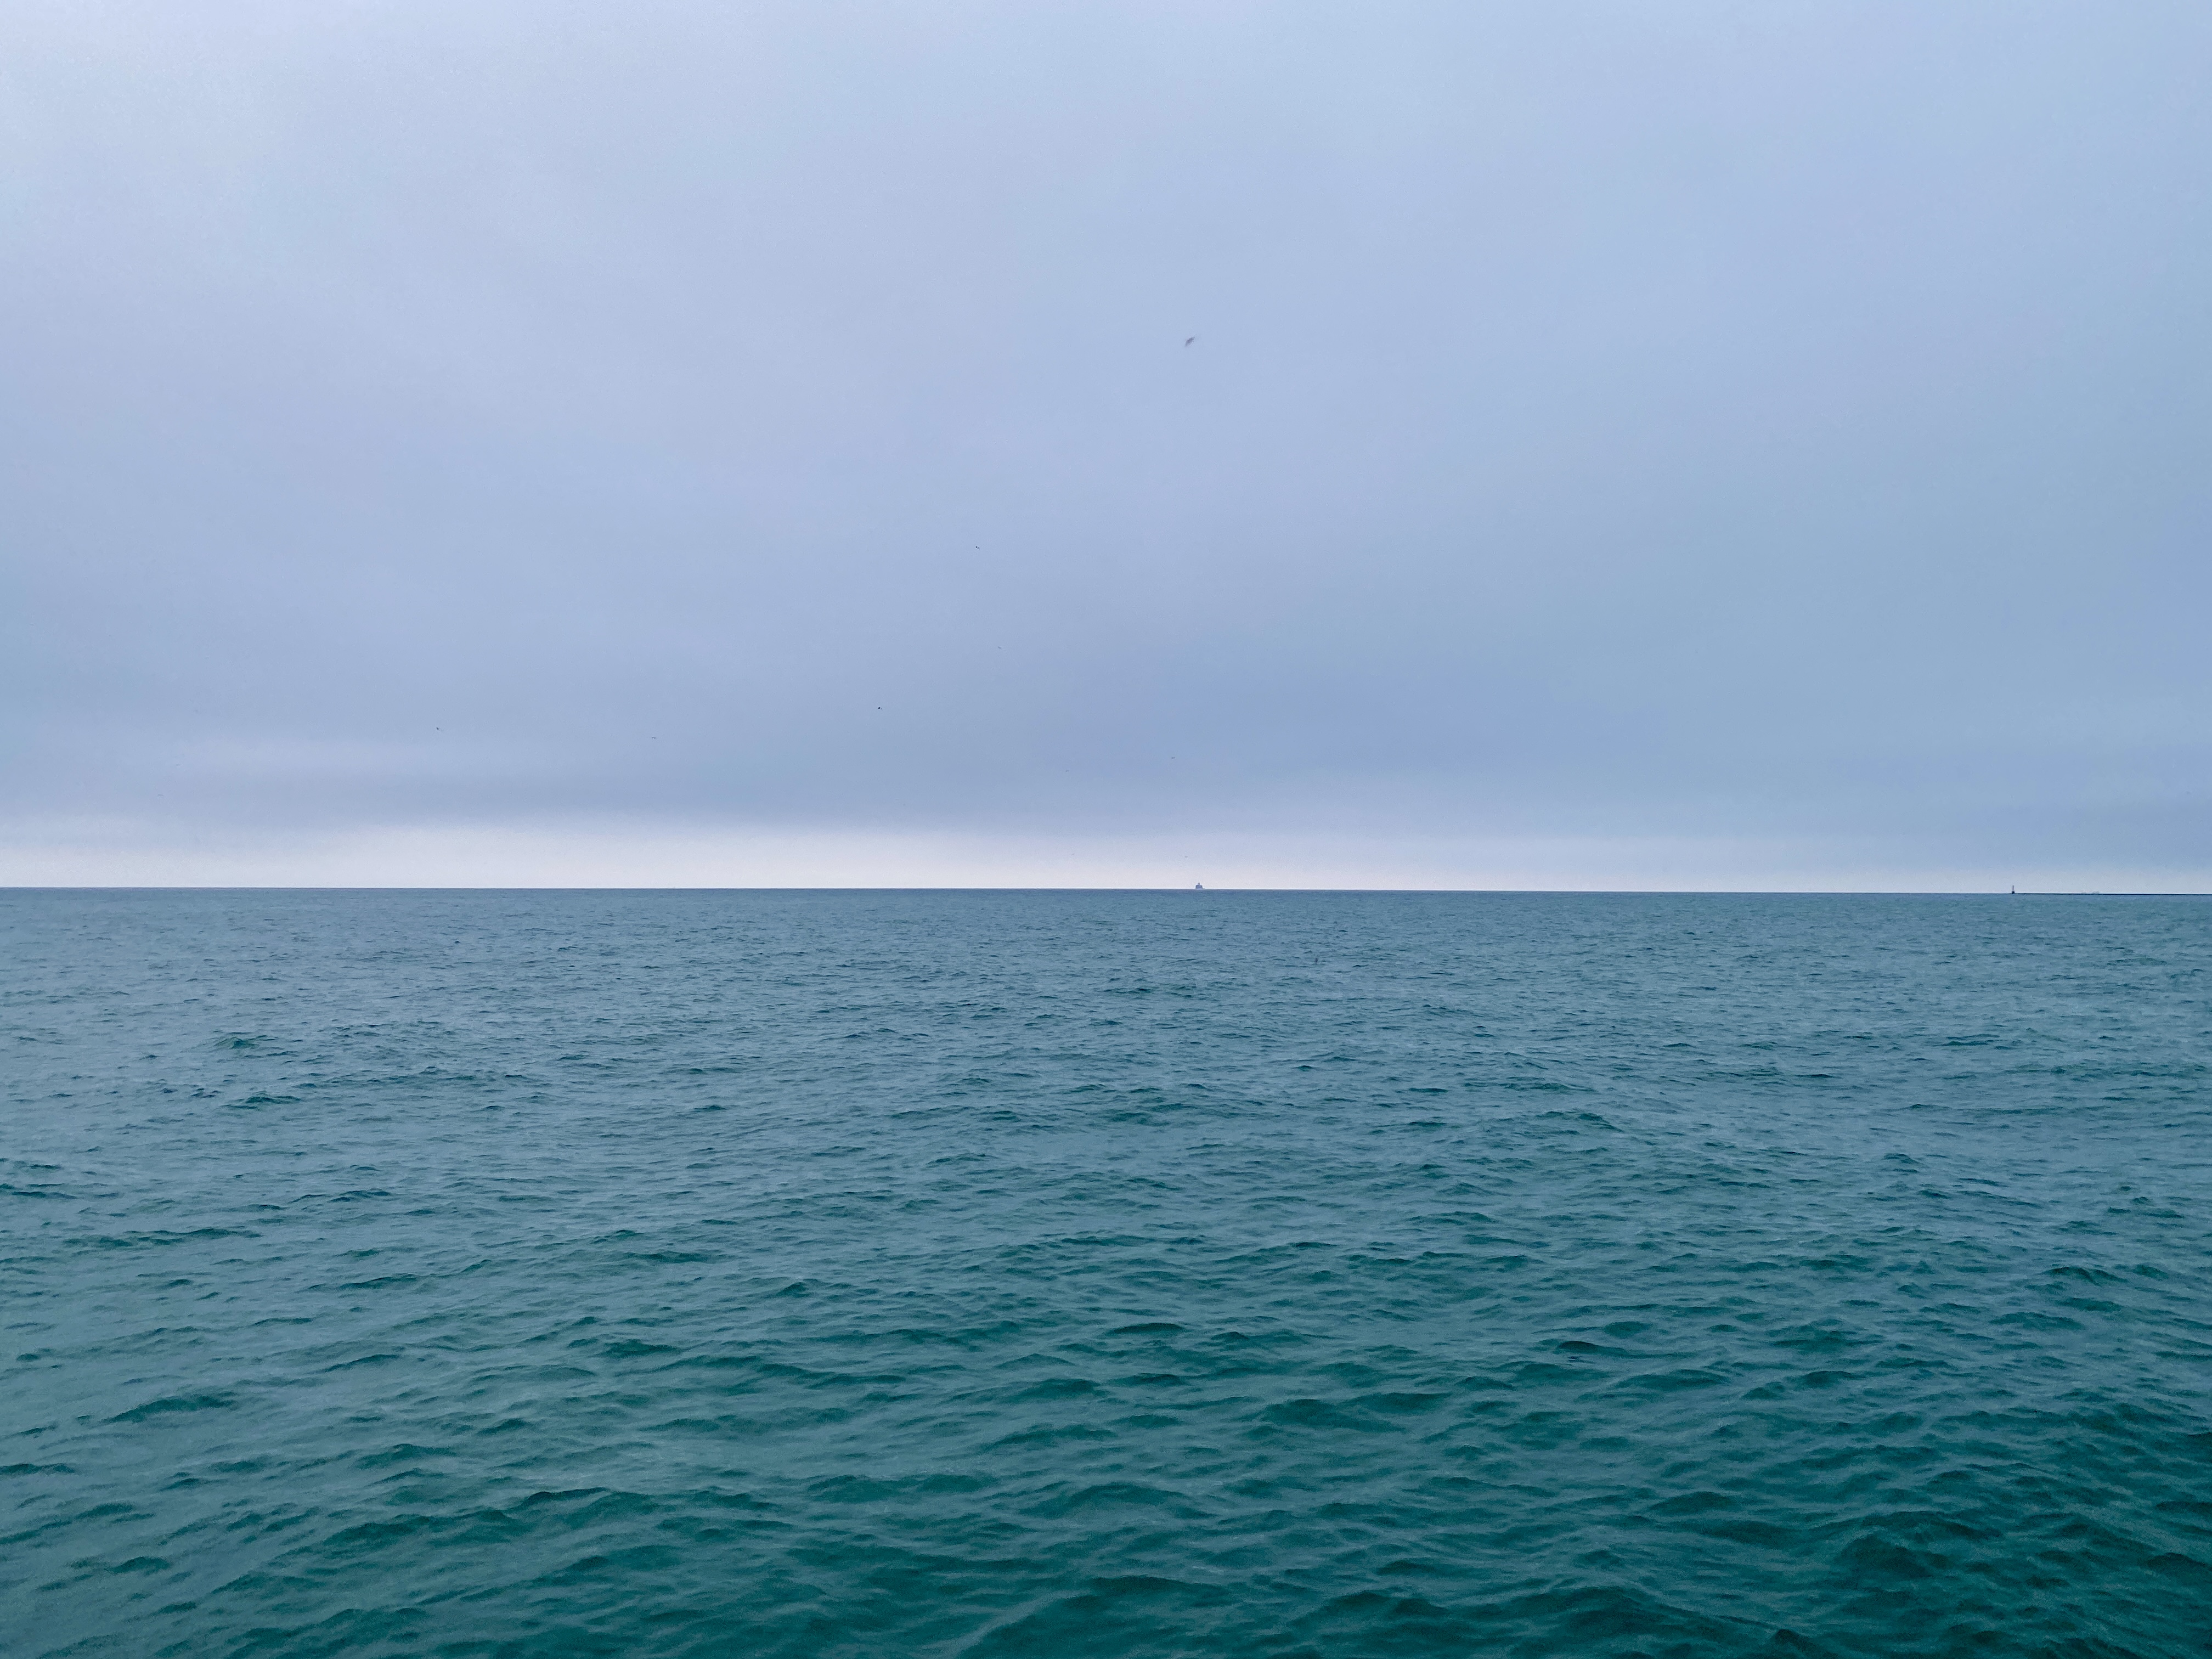 Horizon of large lake under a grey clouded sky, water moderately calm and shaded deep turquoise blue